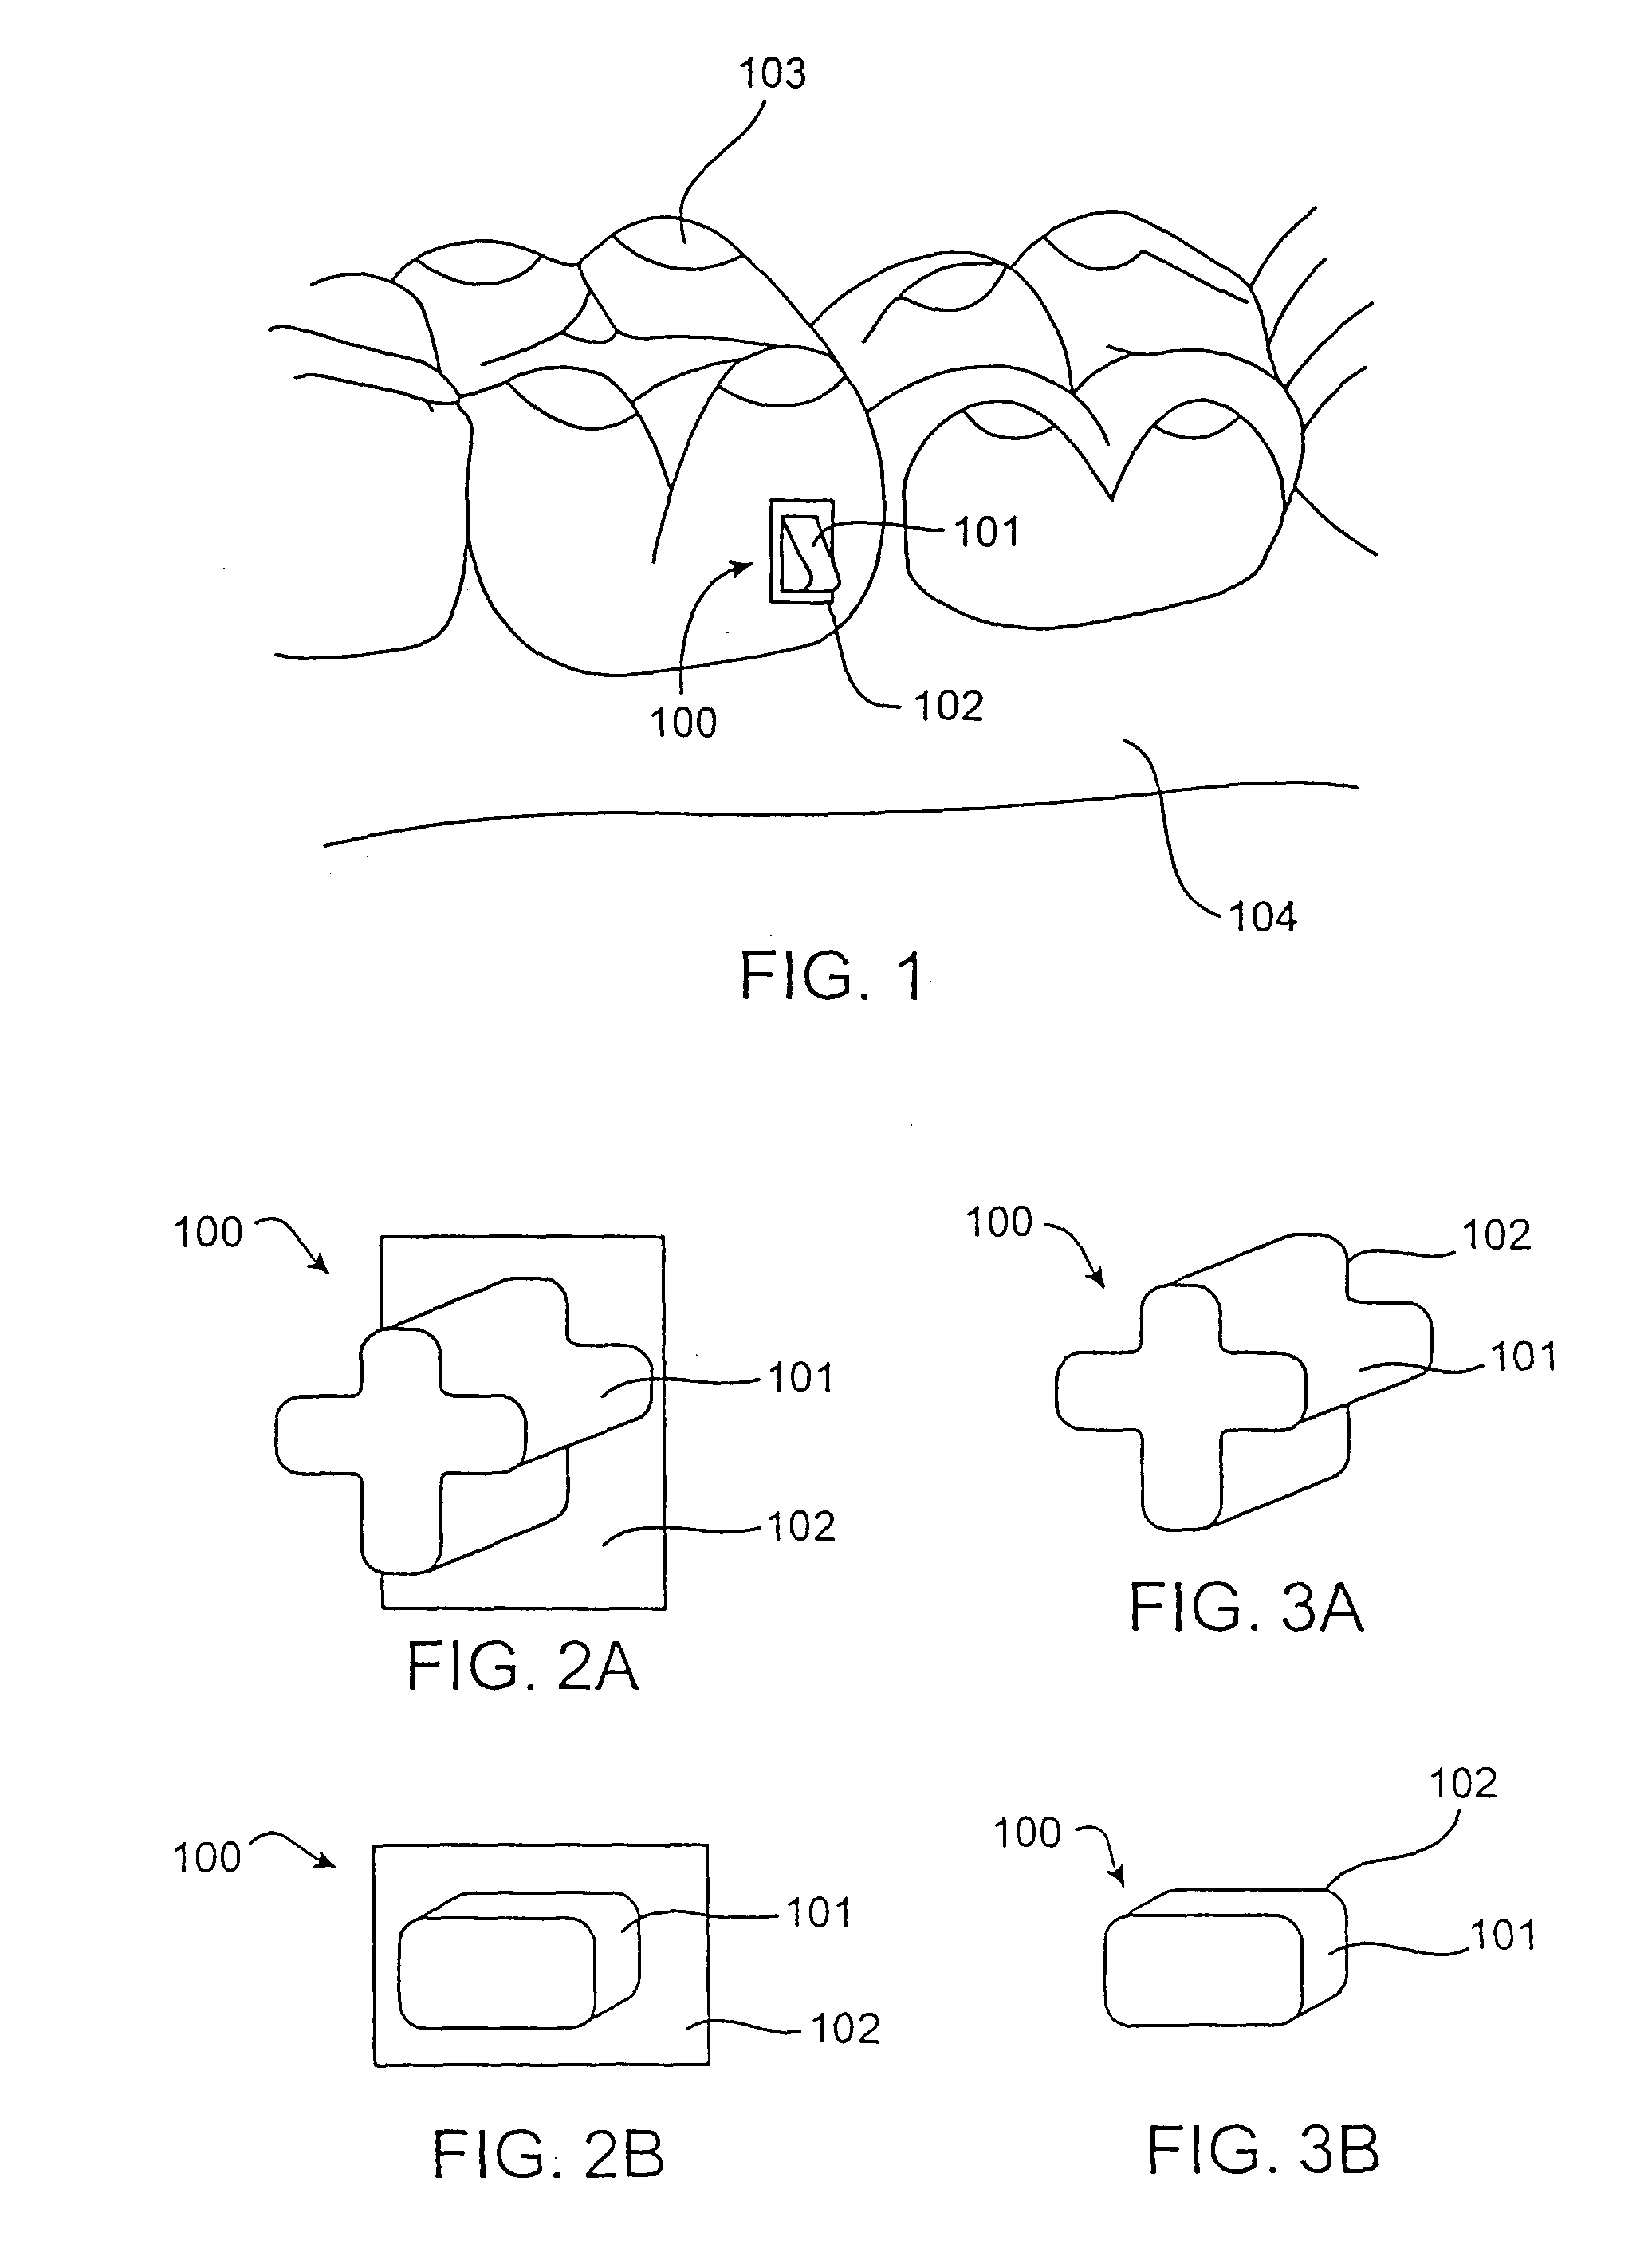 Attachment devices and methods for a dental appliance